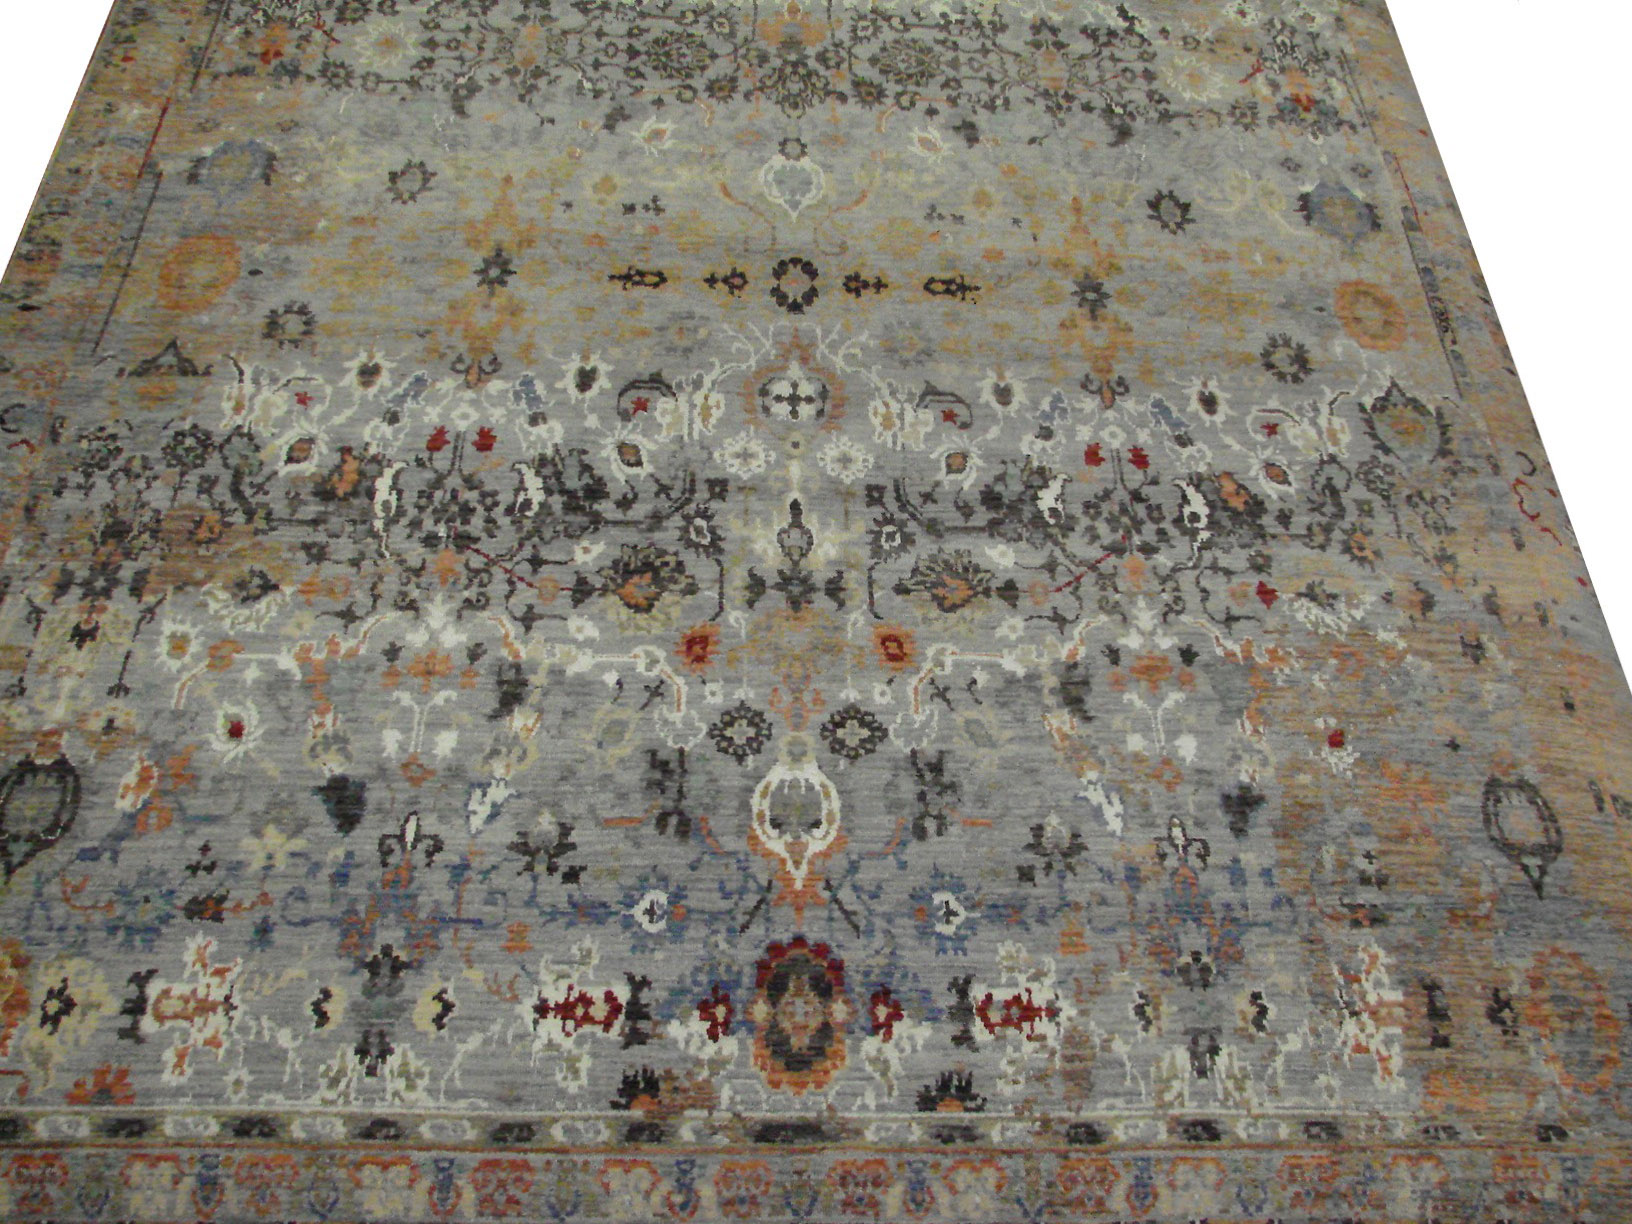 Contemporary & Modern Rugs Jankat 21936 Lt. Blue - Blue & Multi Hand Knotted Rug